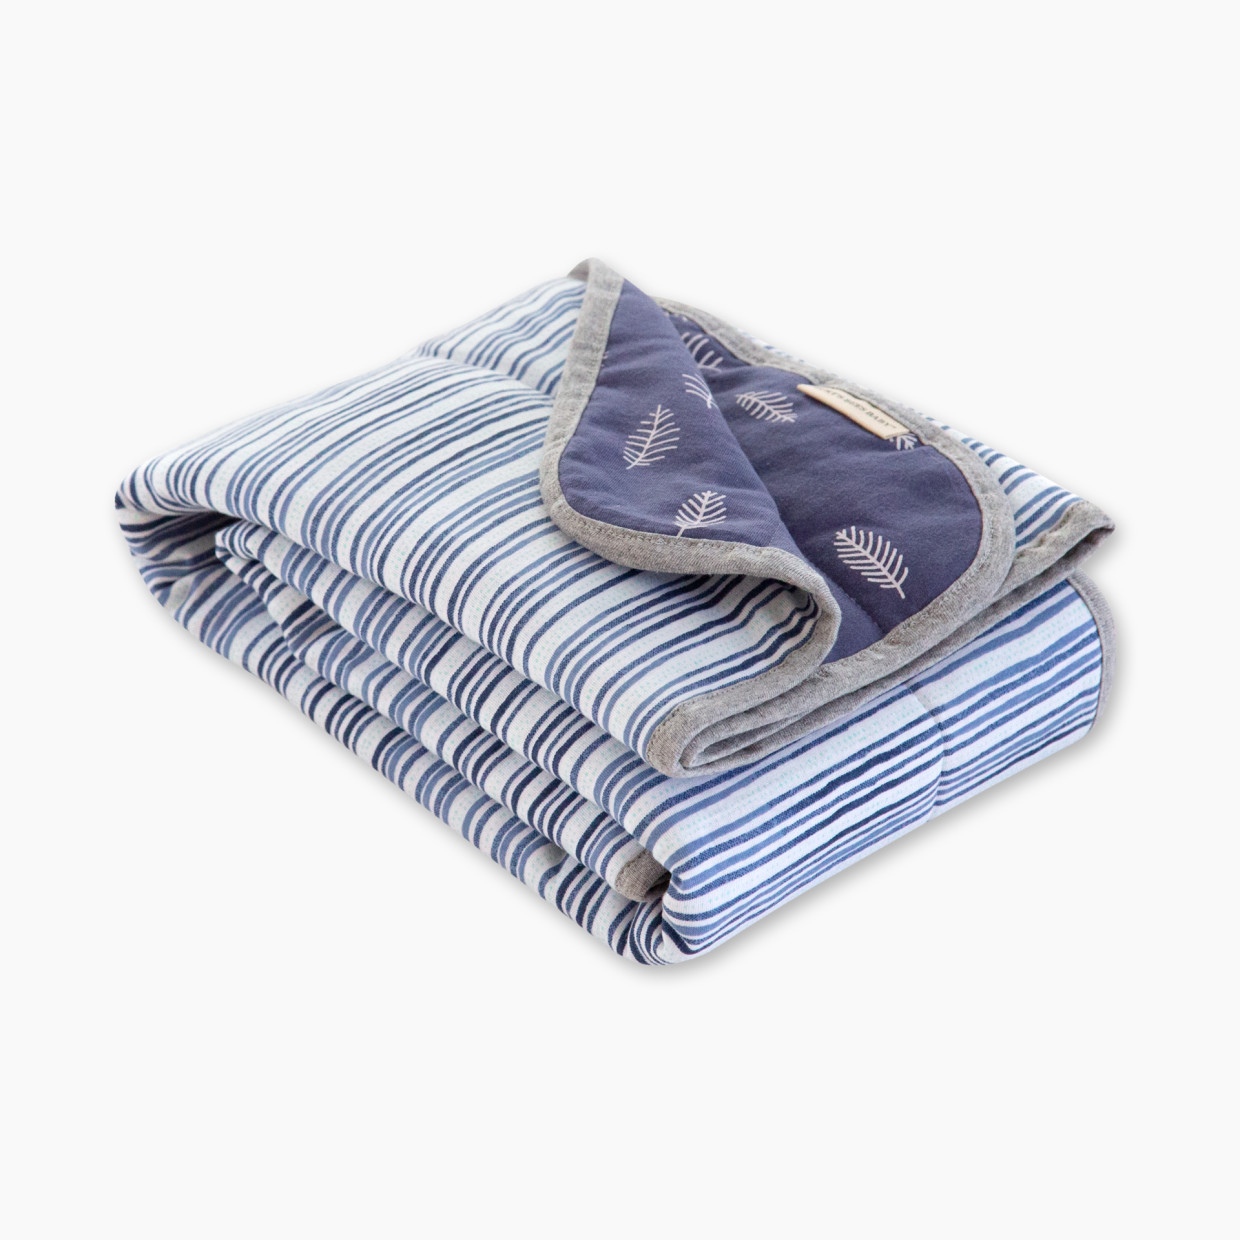 Burt's Bees Baby Reversible Organic Cotton Jersey Knit Blanket - On The Road.